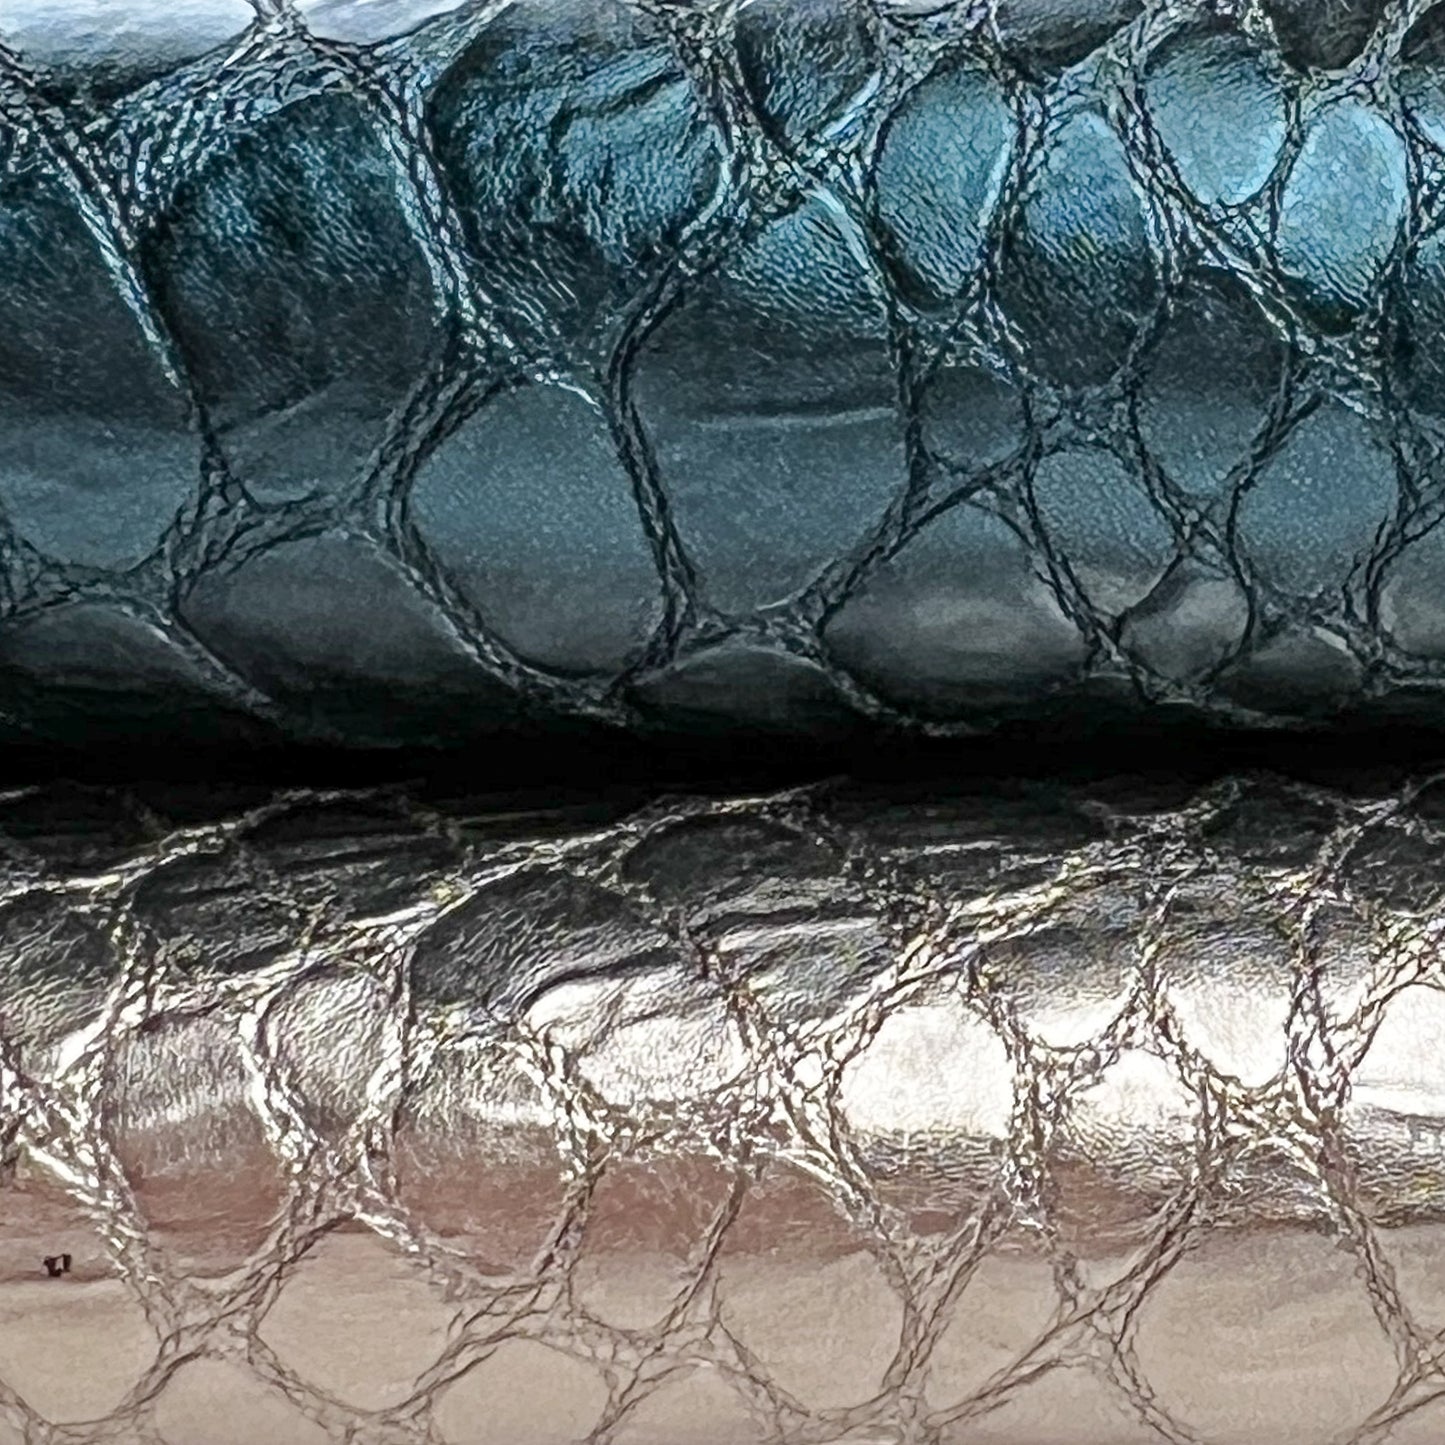 Light Gold And Teal Blue Metallic Lambskin 1mm/2.5oz TEAL & GOLD REPTILE 1505